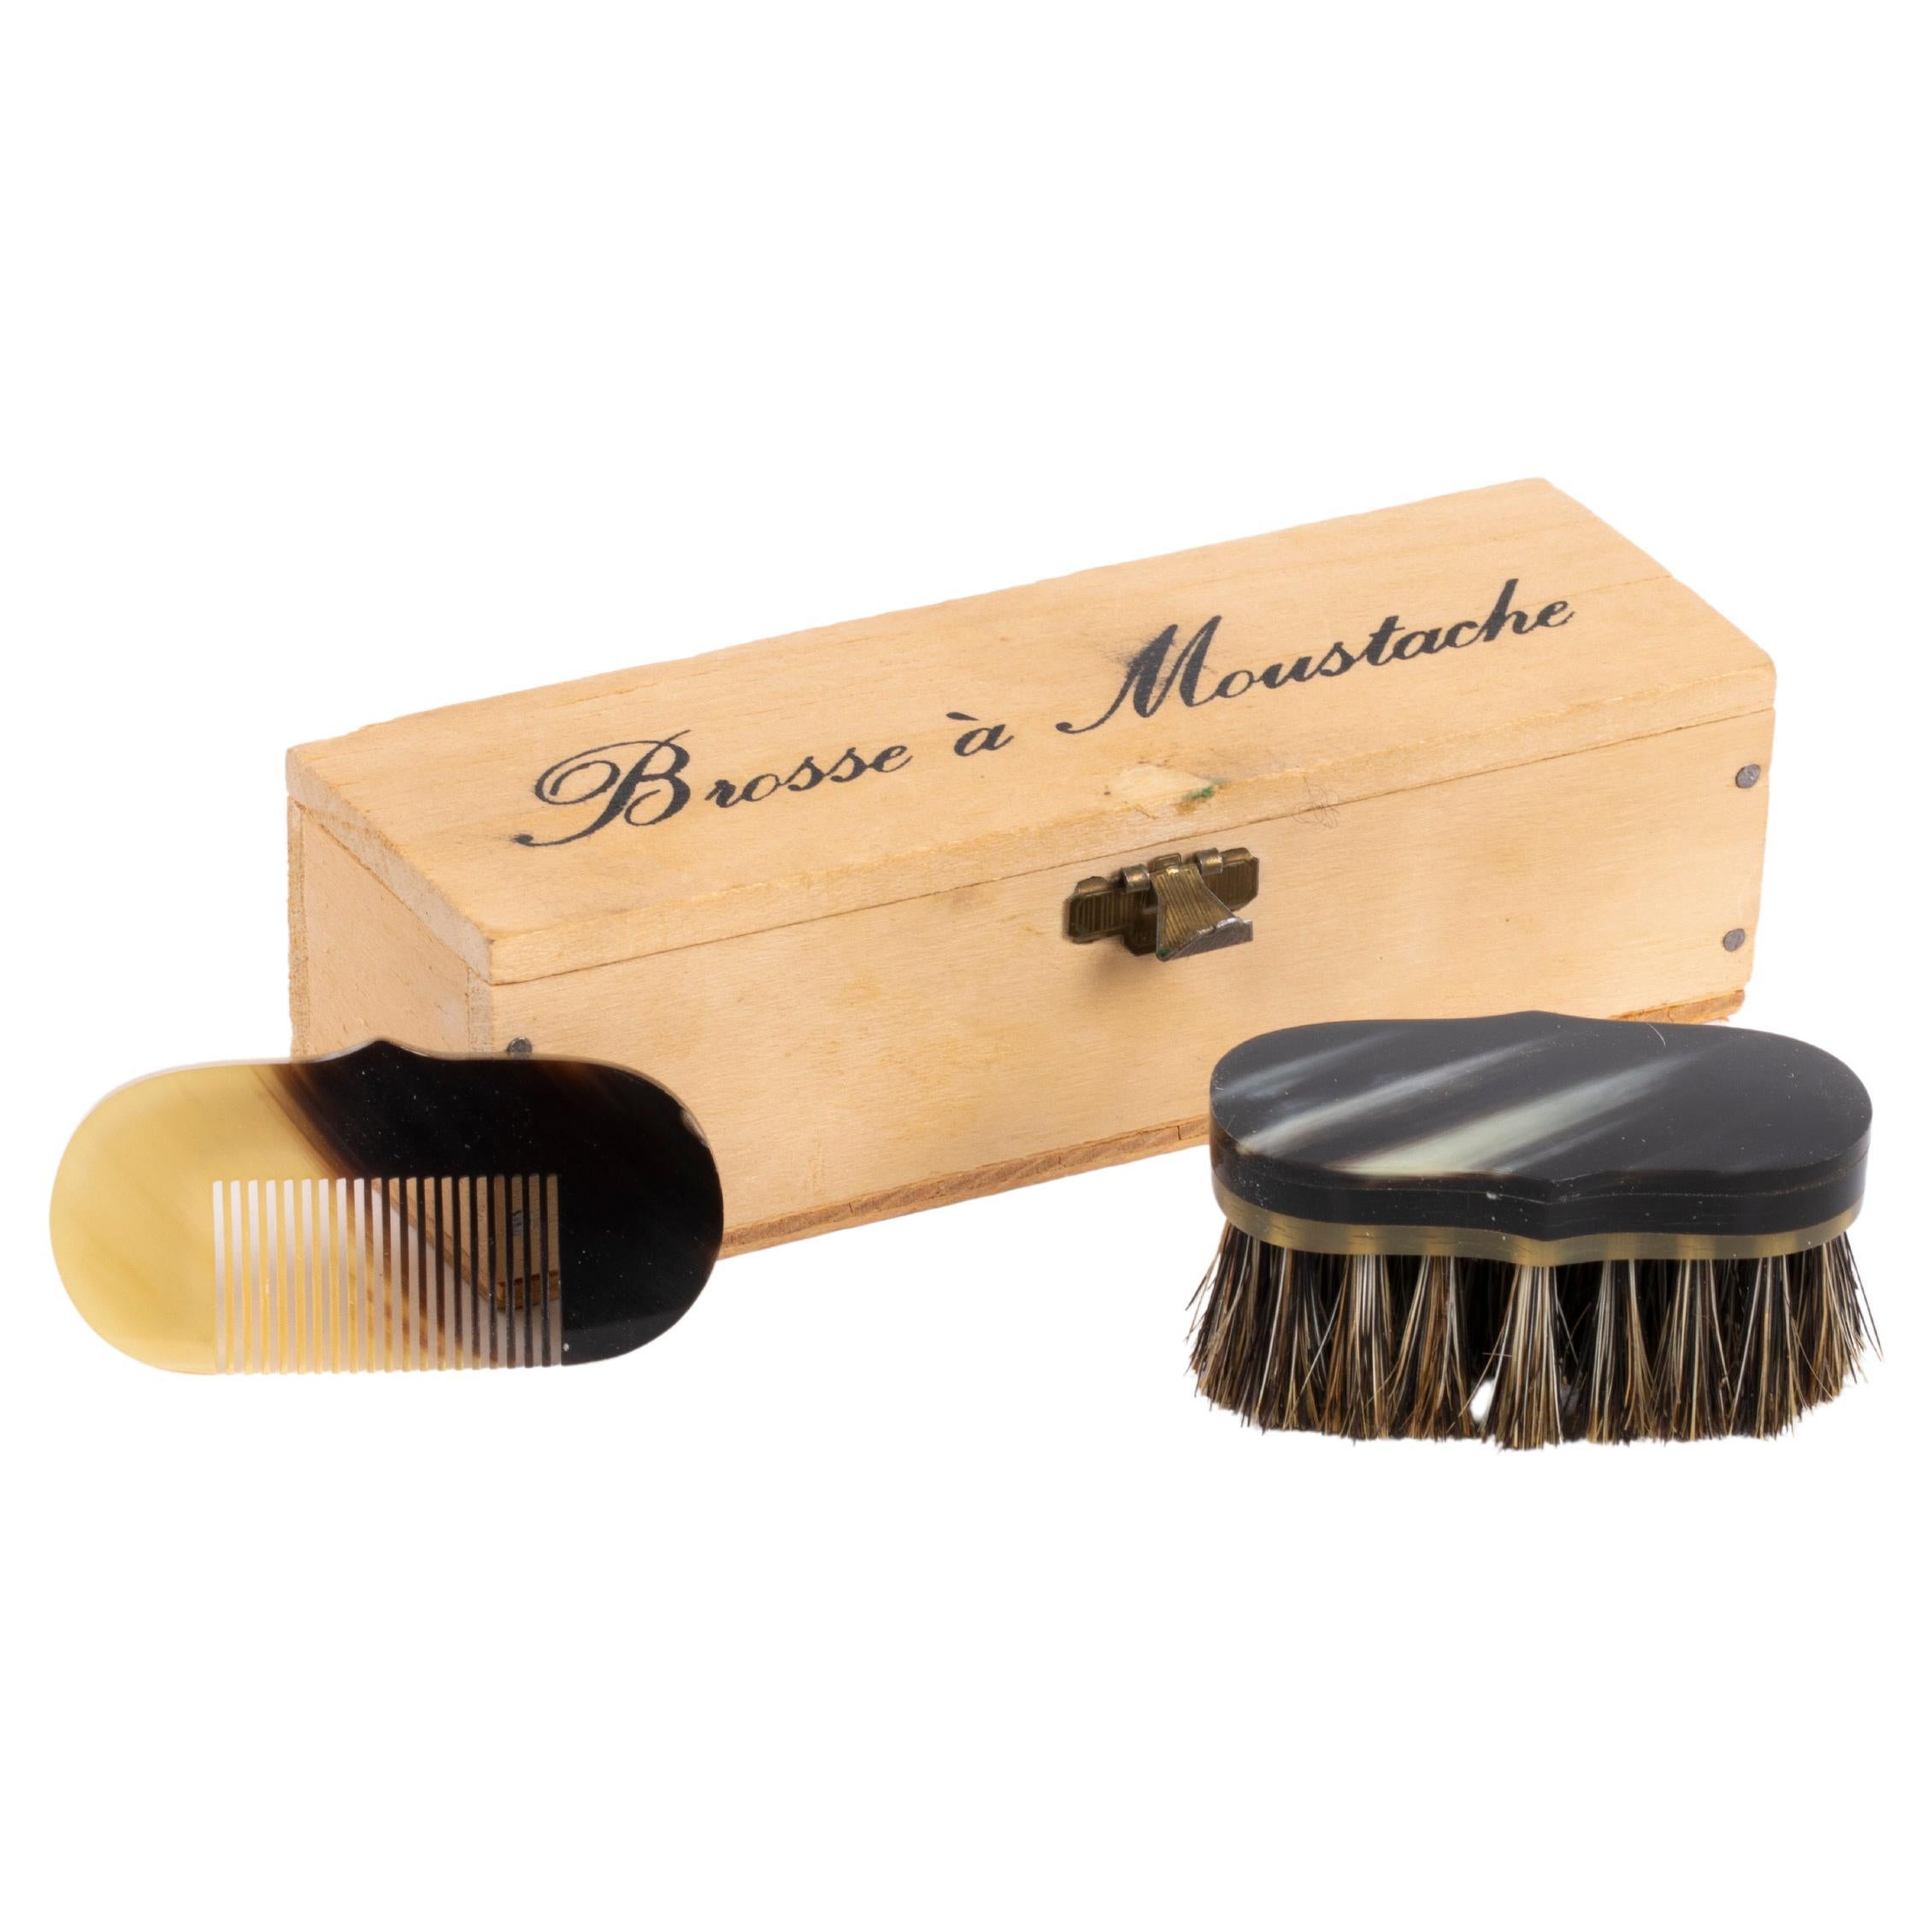 Carl Auböck Comb and Brush in a Box, Austria, 1960s For Sale